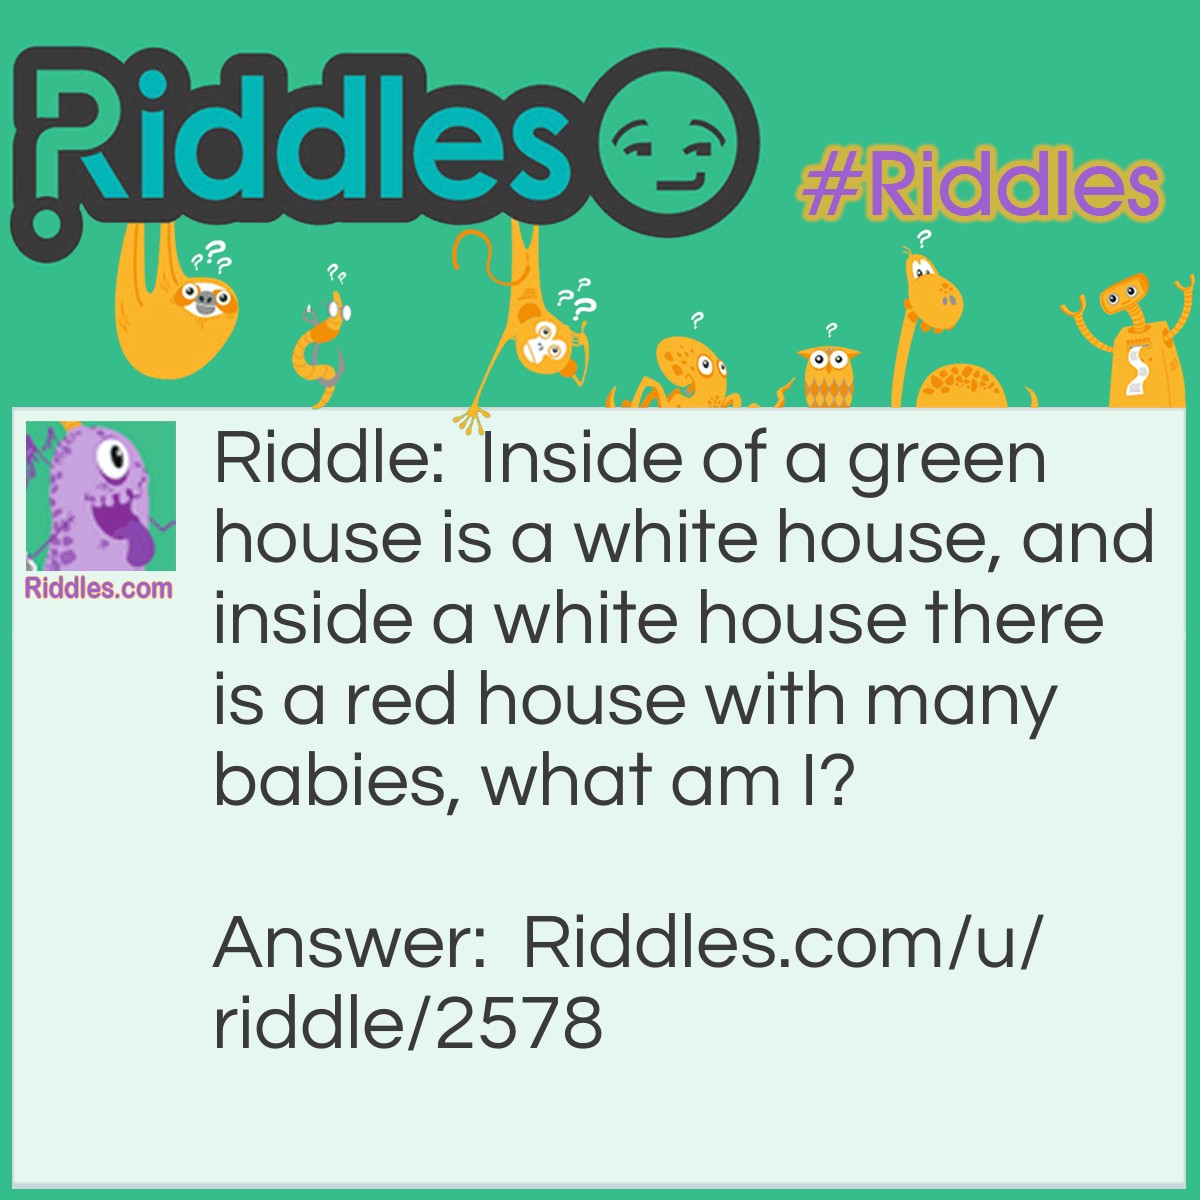 Riddle: Inside of a green house is a white house, and inside a white house there is a red house with many babies, what am I? Answer: A watermelon.